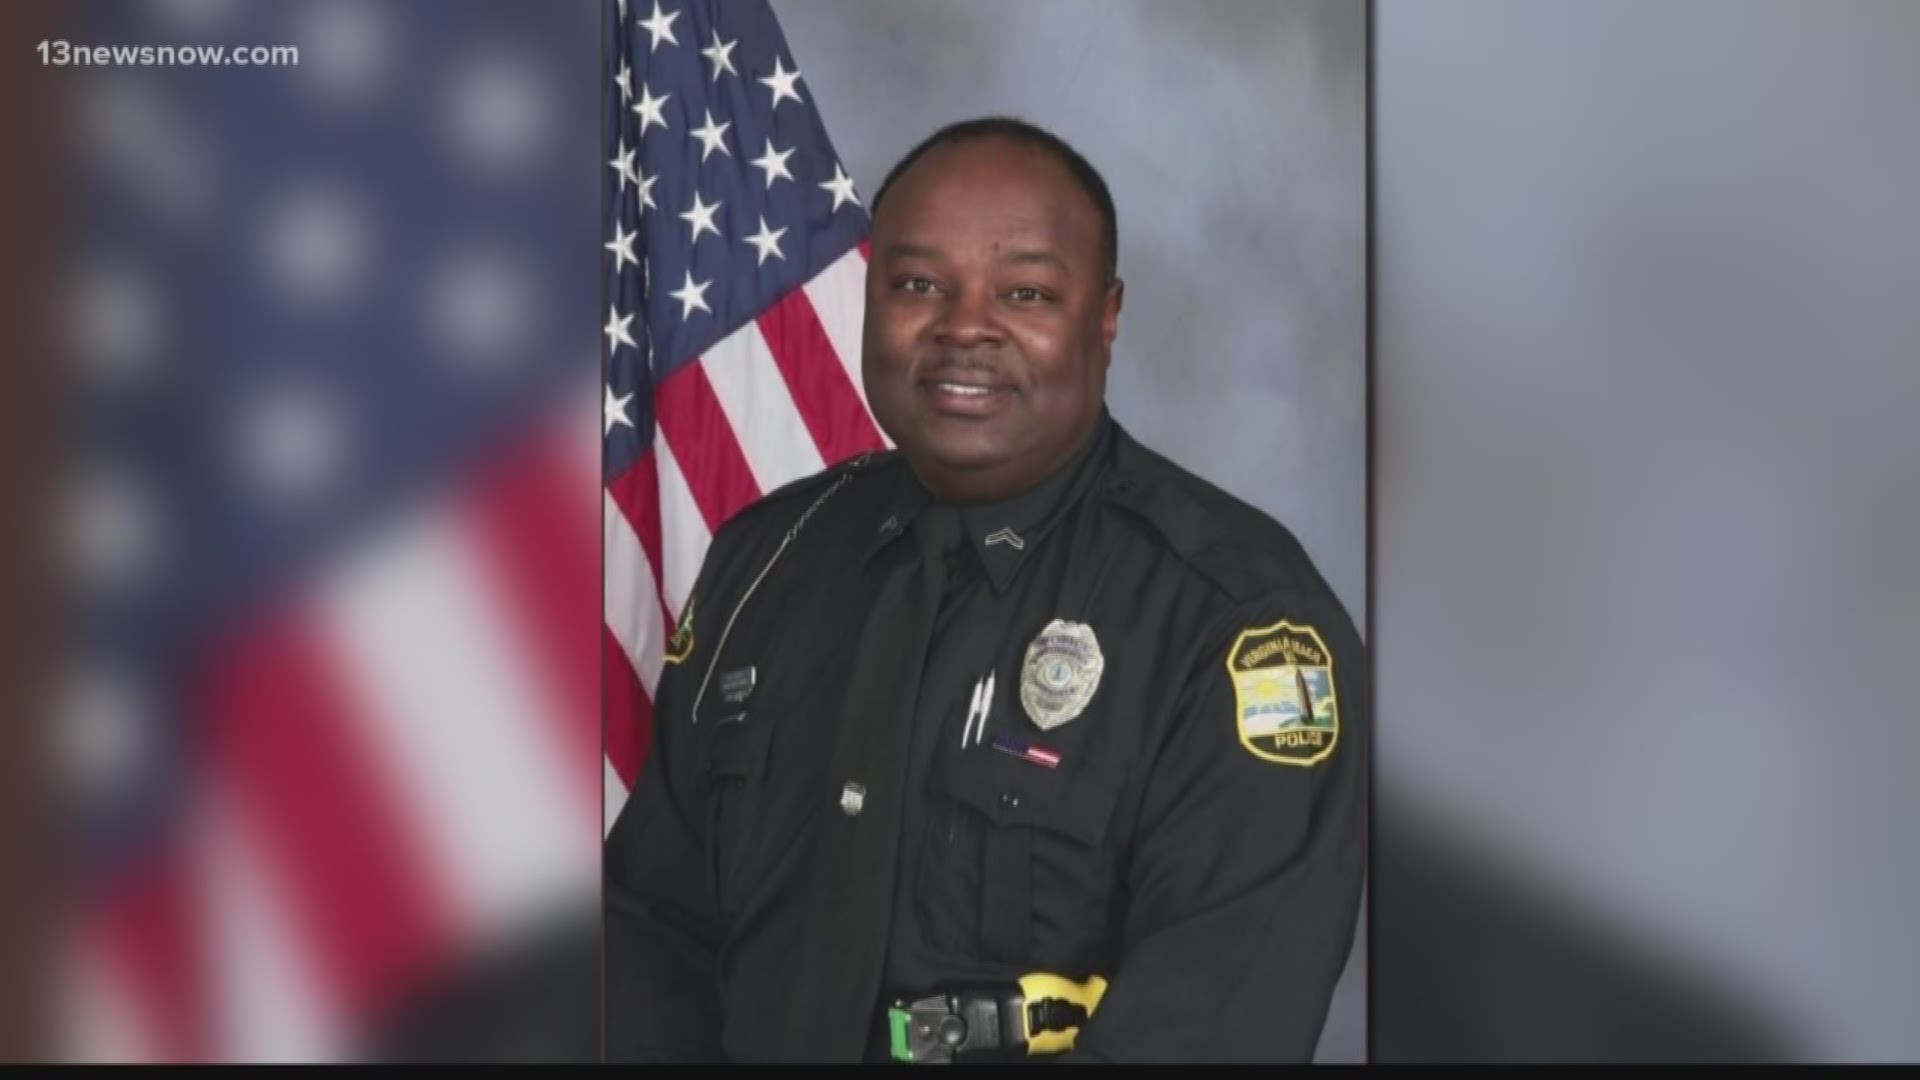 MPO Kelvin Bailey died of a heart attack on November 14 while working. He was a well known officer, but his family remembers him as a father and husband.